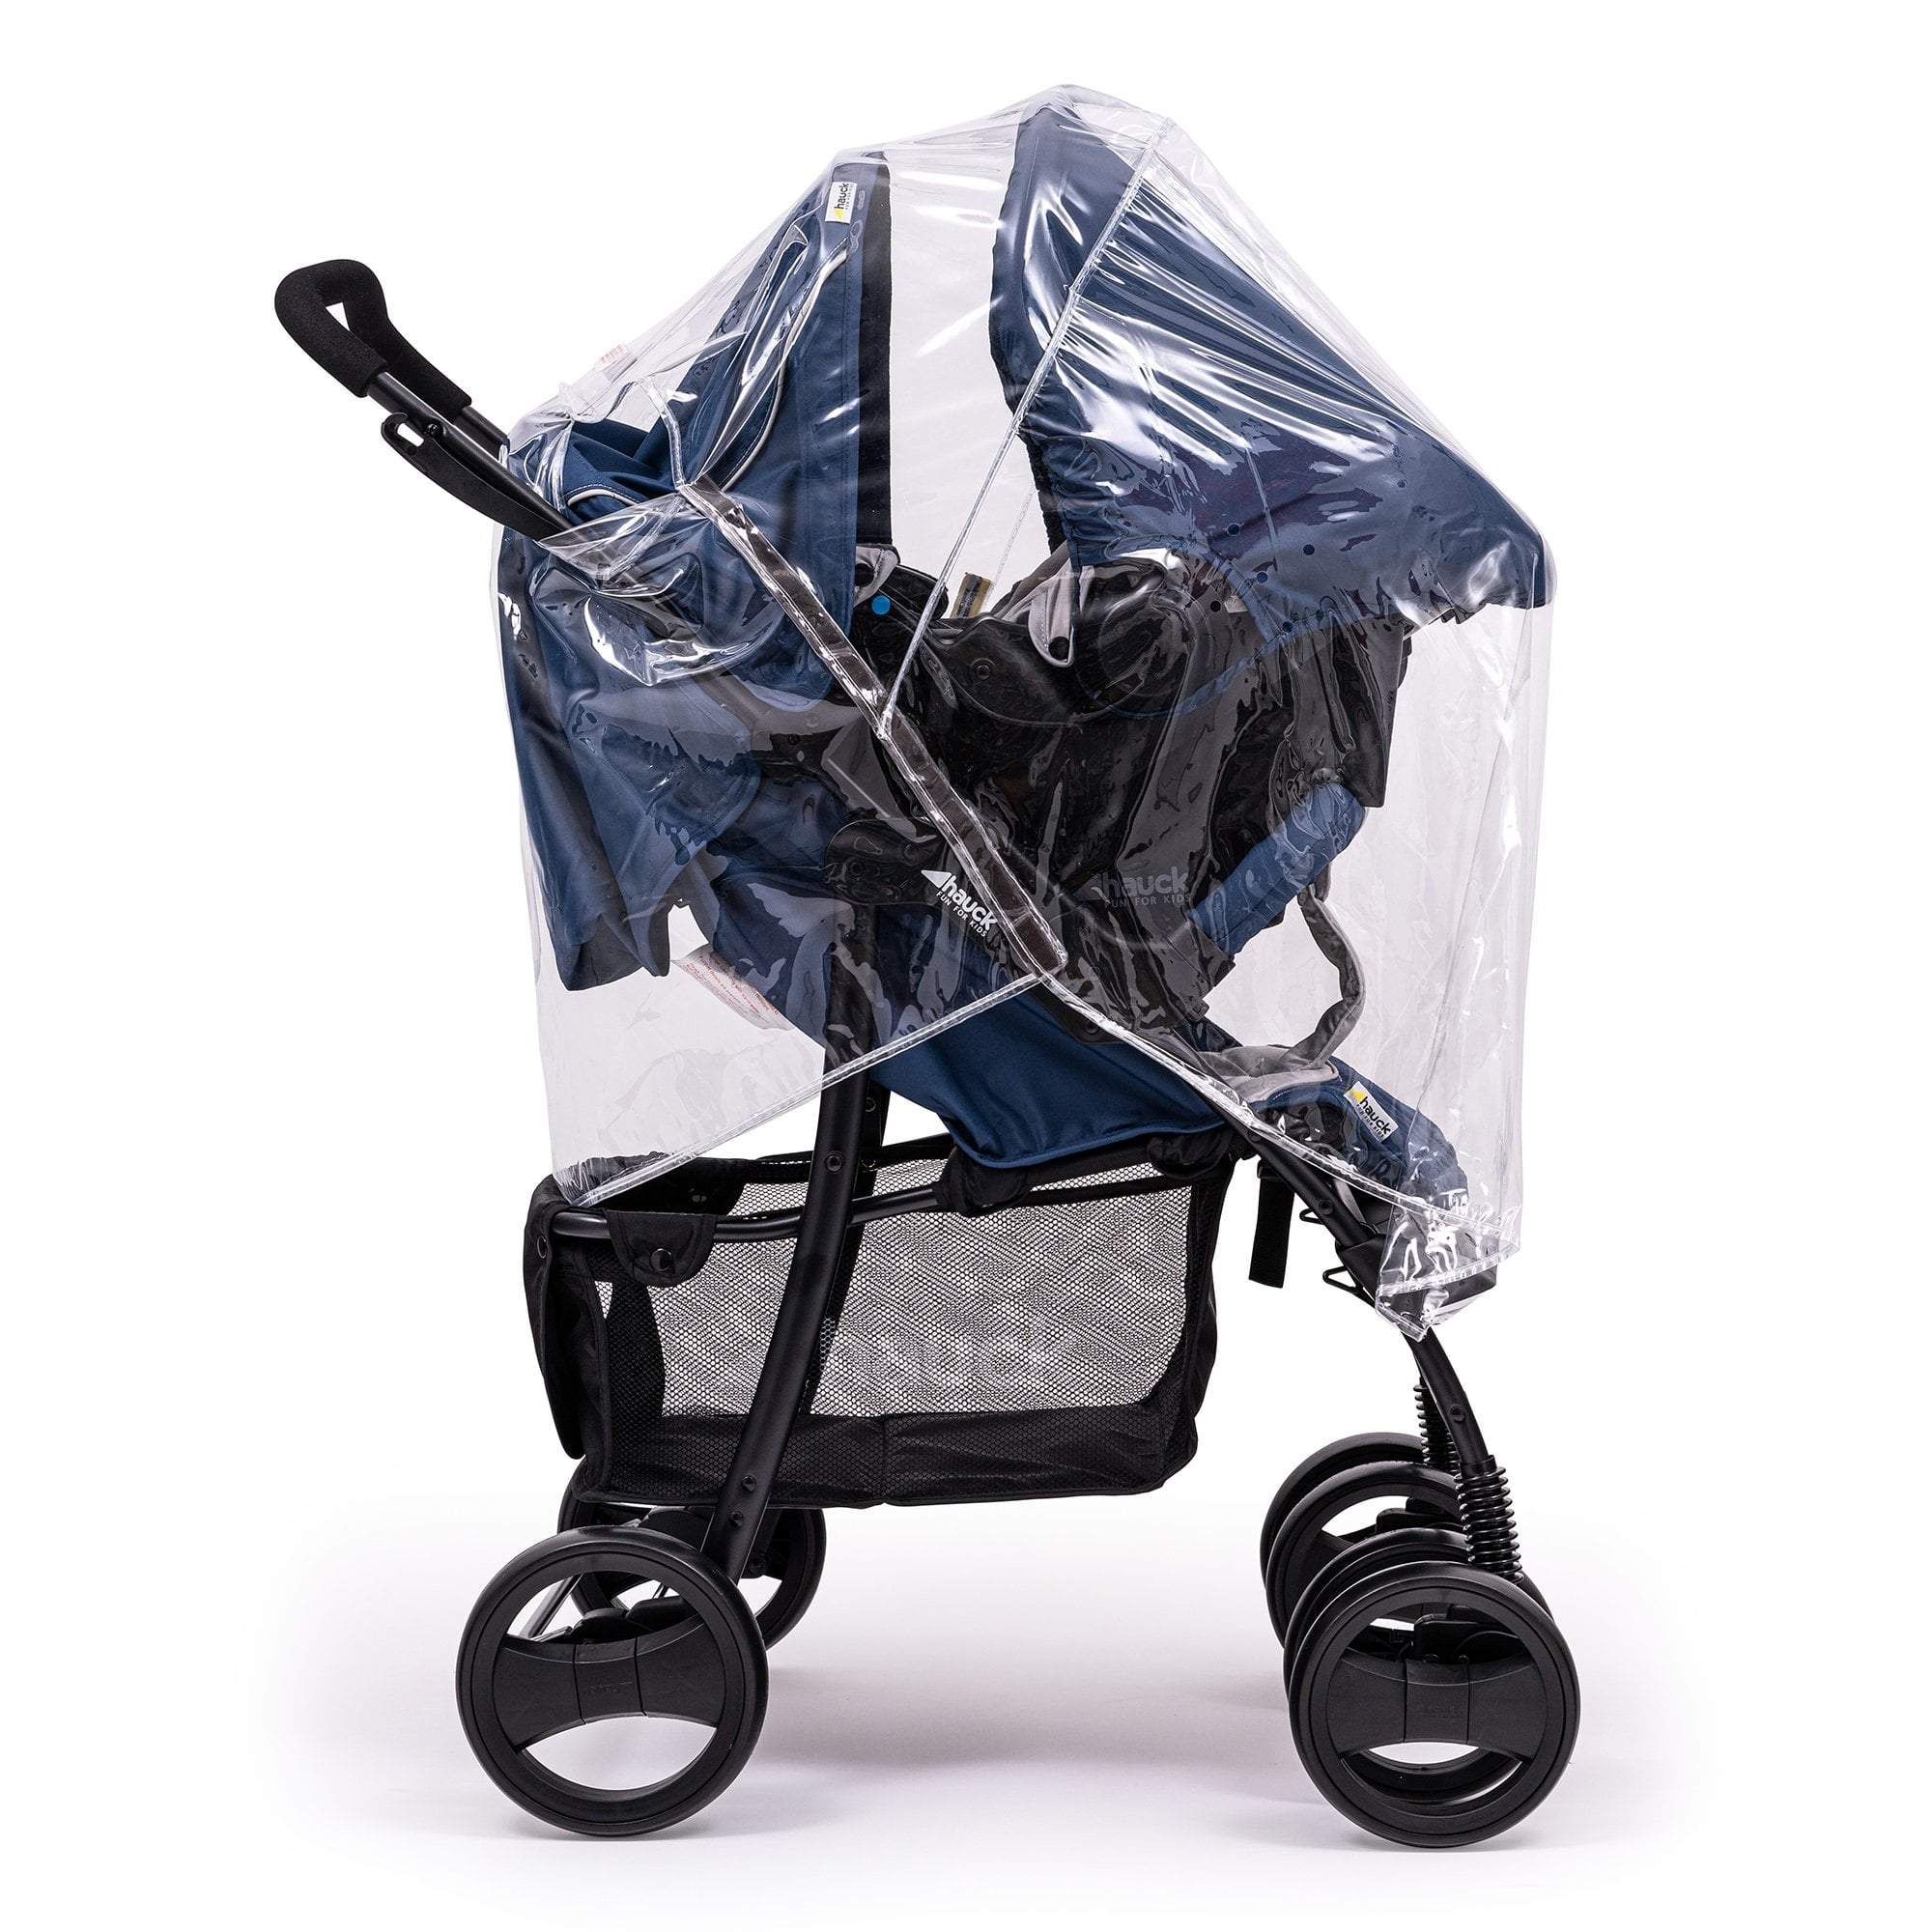 Travel System Raincover Compatible with Norton - Fits All Models - For Your Little One